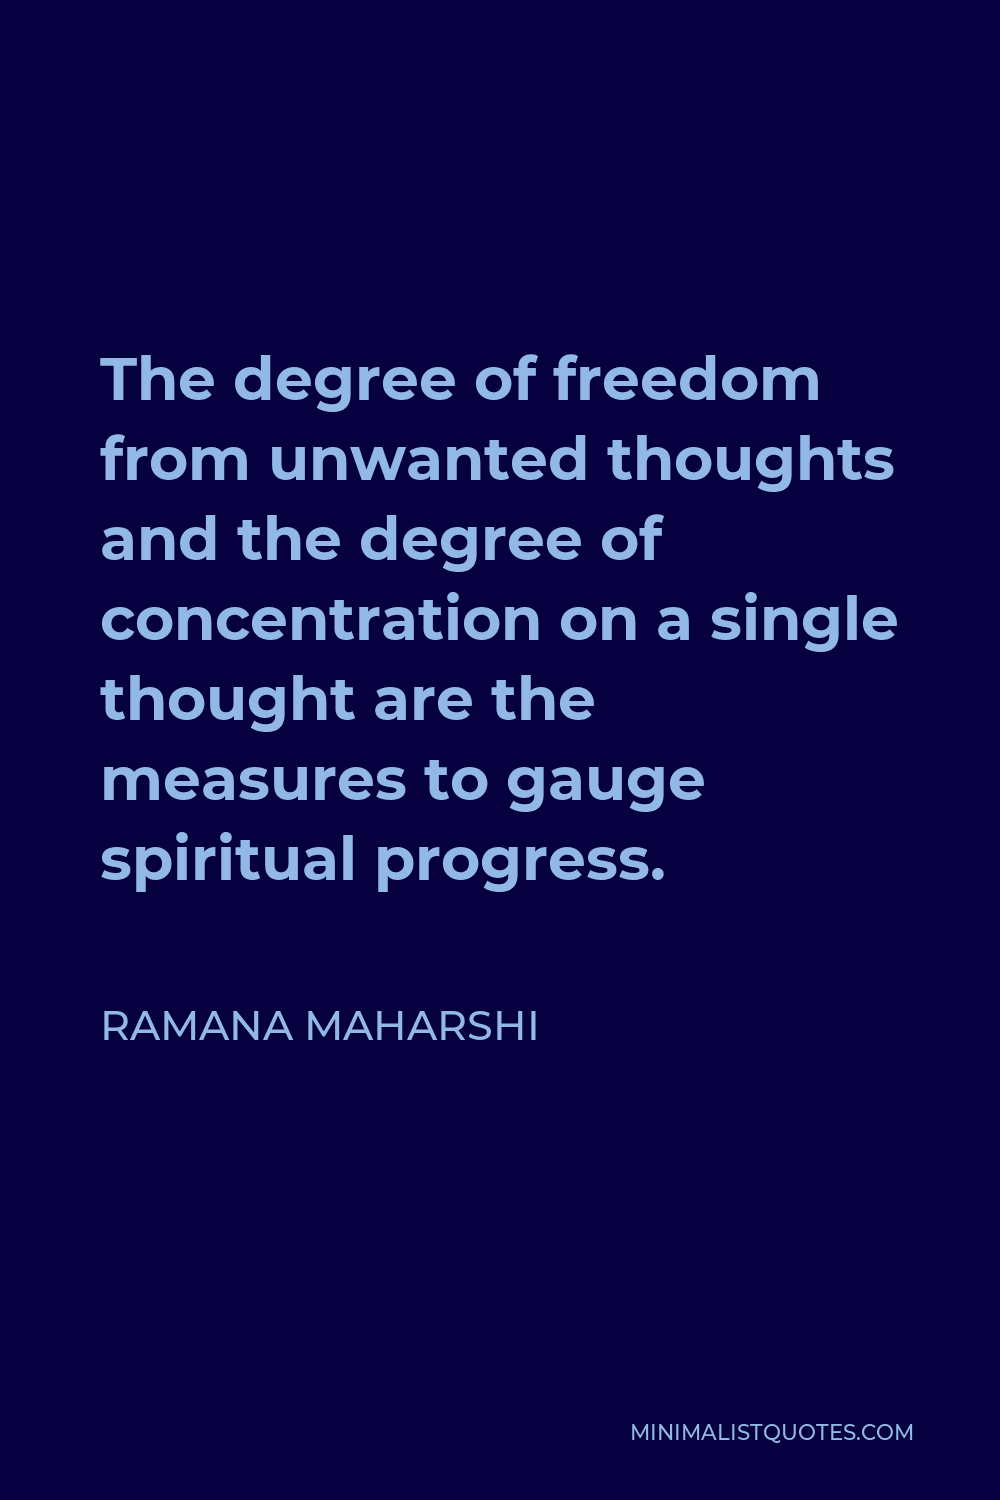 Ramana Maharshi Quote - The degree of freedom from unwanted thoughts and the degree of concentration on a single thought are the measures to gauge spiritual progress.